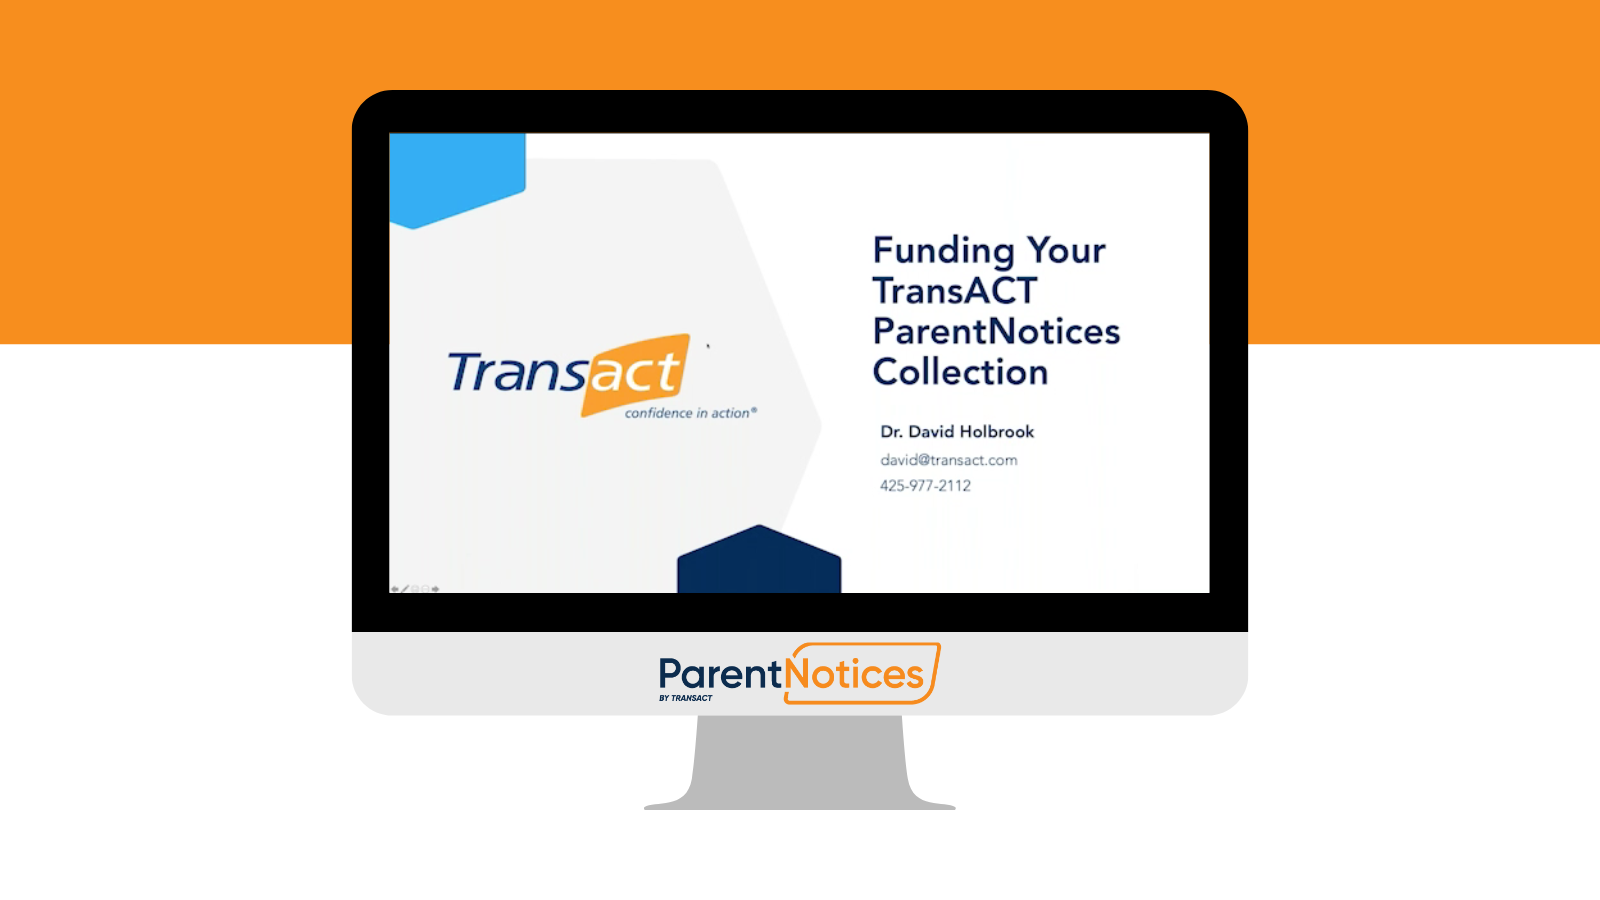 Funding Your ParentNotices Collection